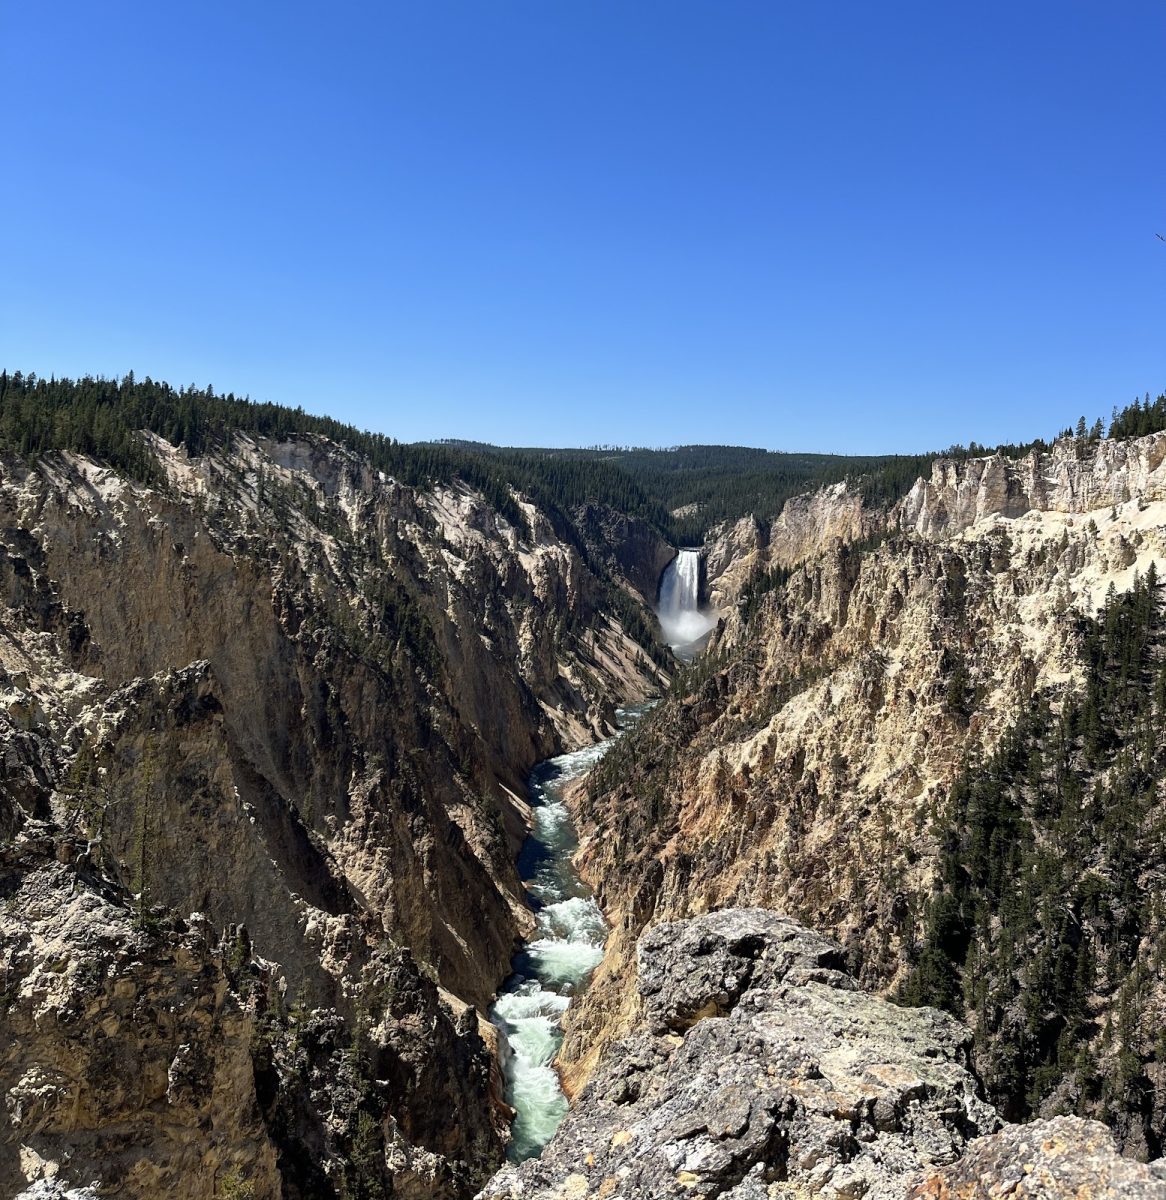 Yellowstone National Park is home to more than 500 active geysers and 290 waterfalls.